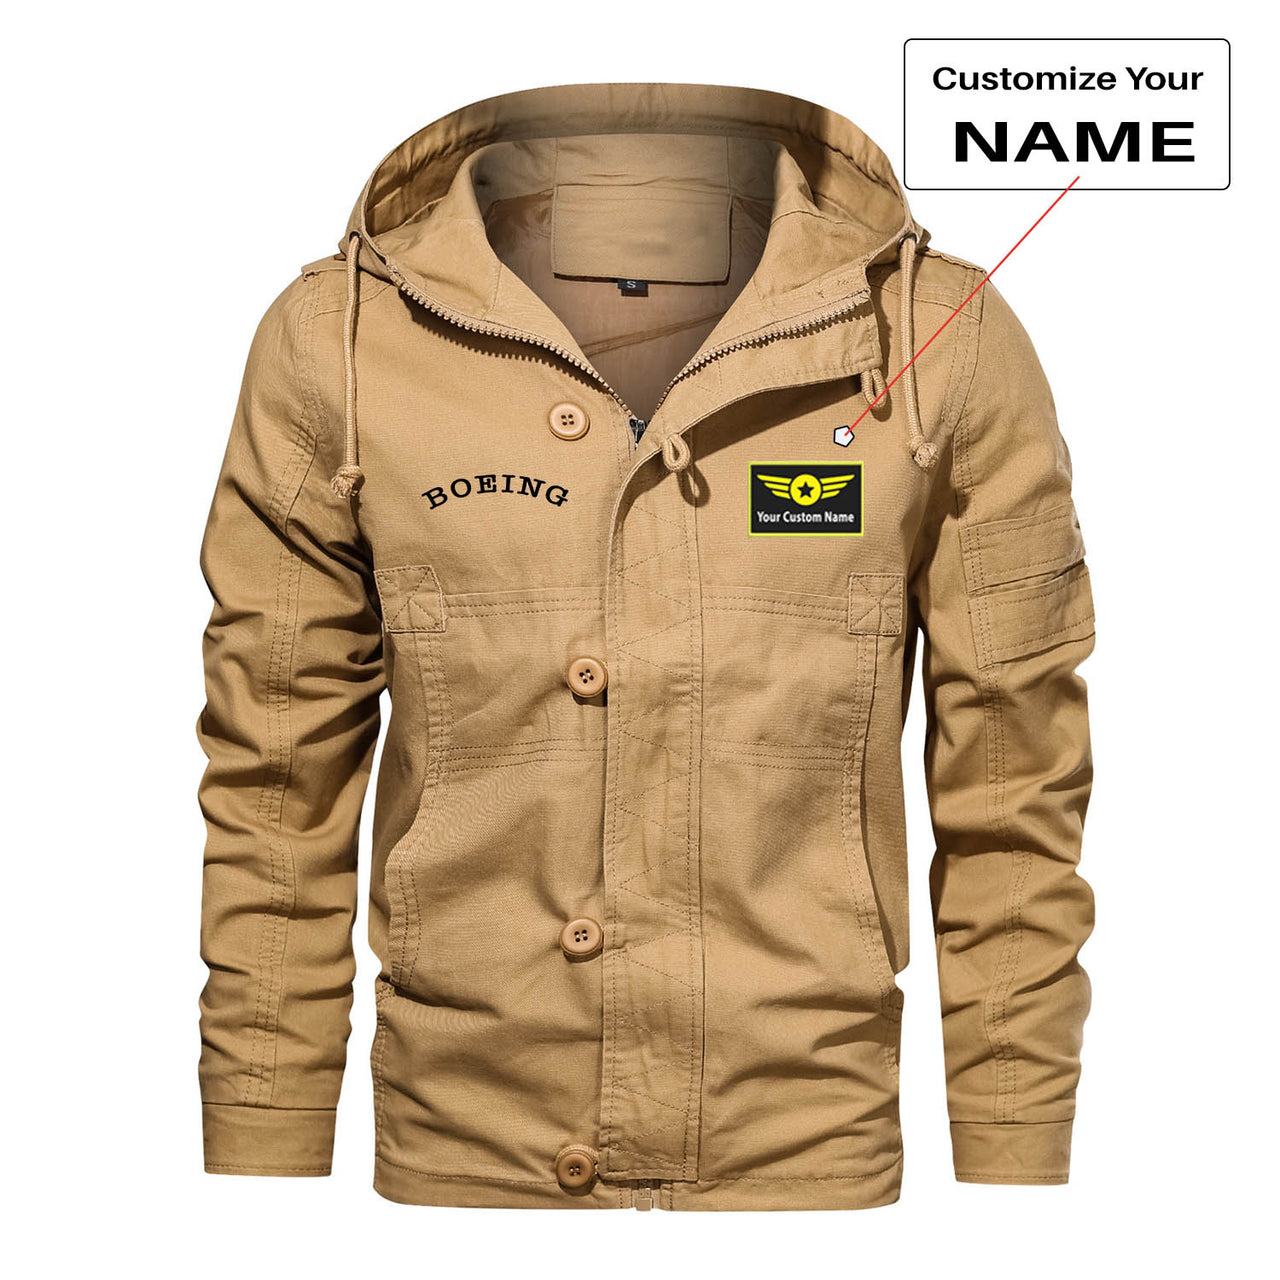 Special BOEING Text Designed Cotton Jackets